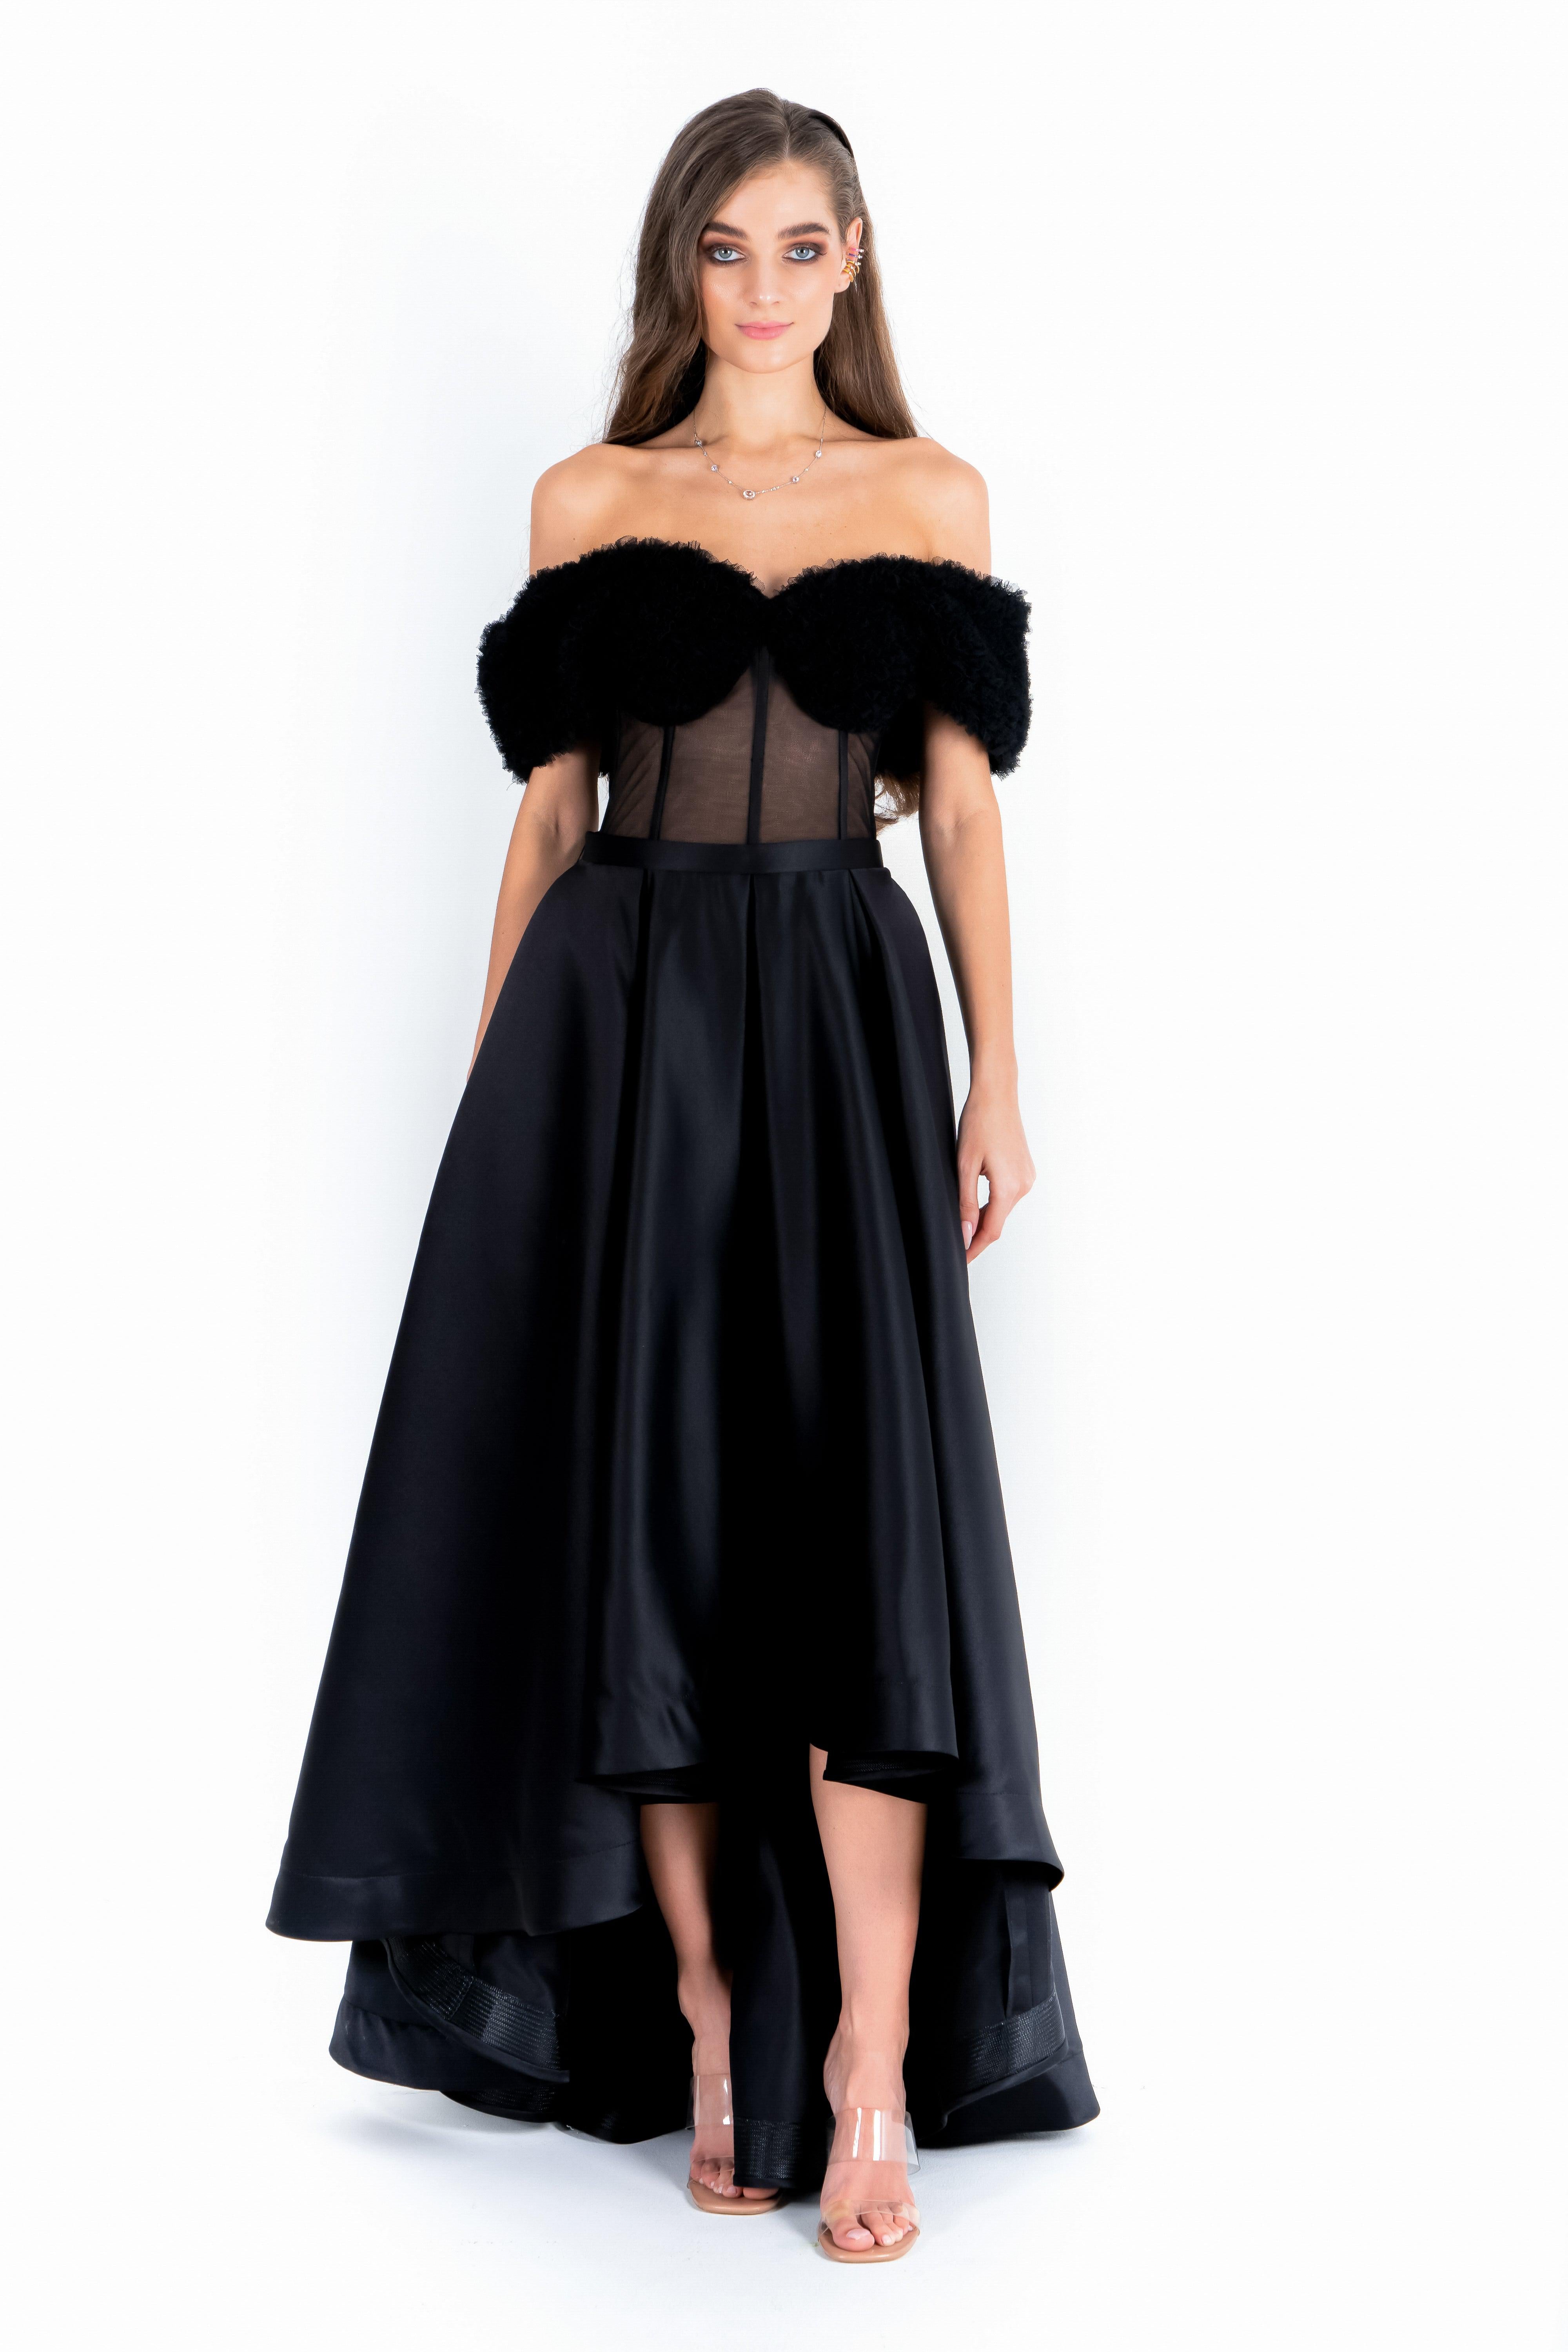 Black Sheering Off Shoulder Gown With Satin Skirt By AAVVA